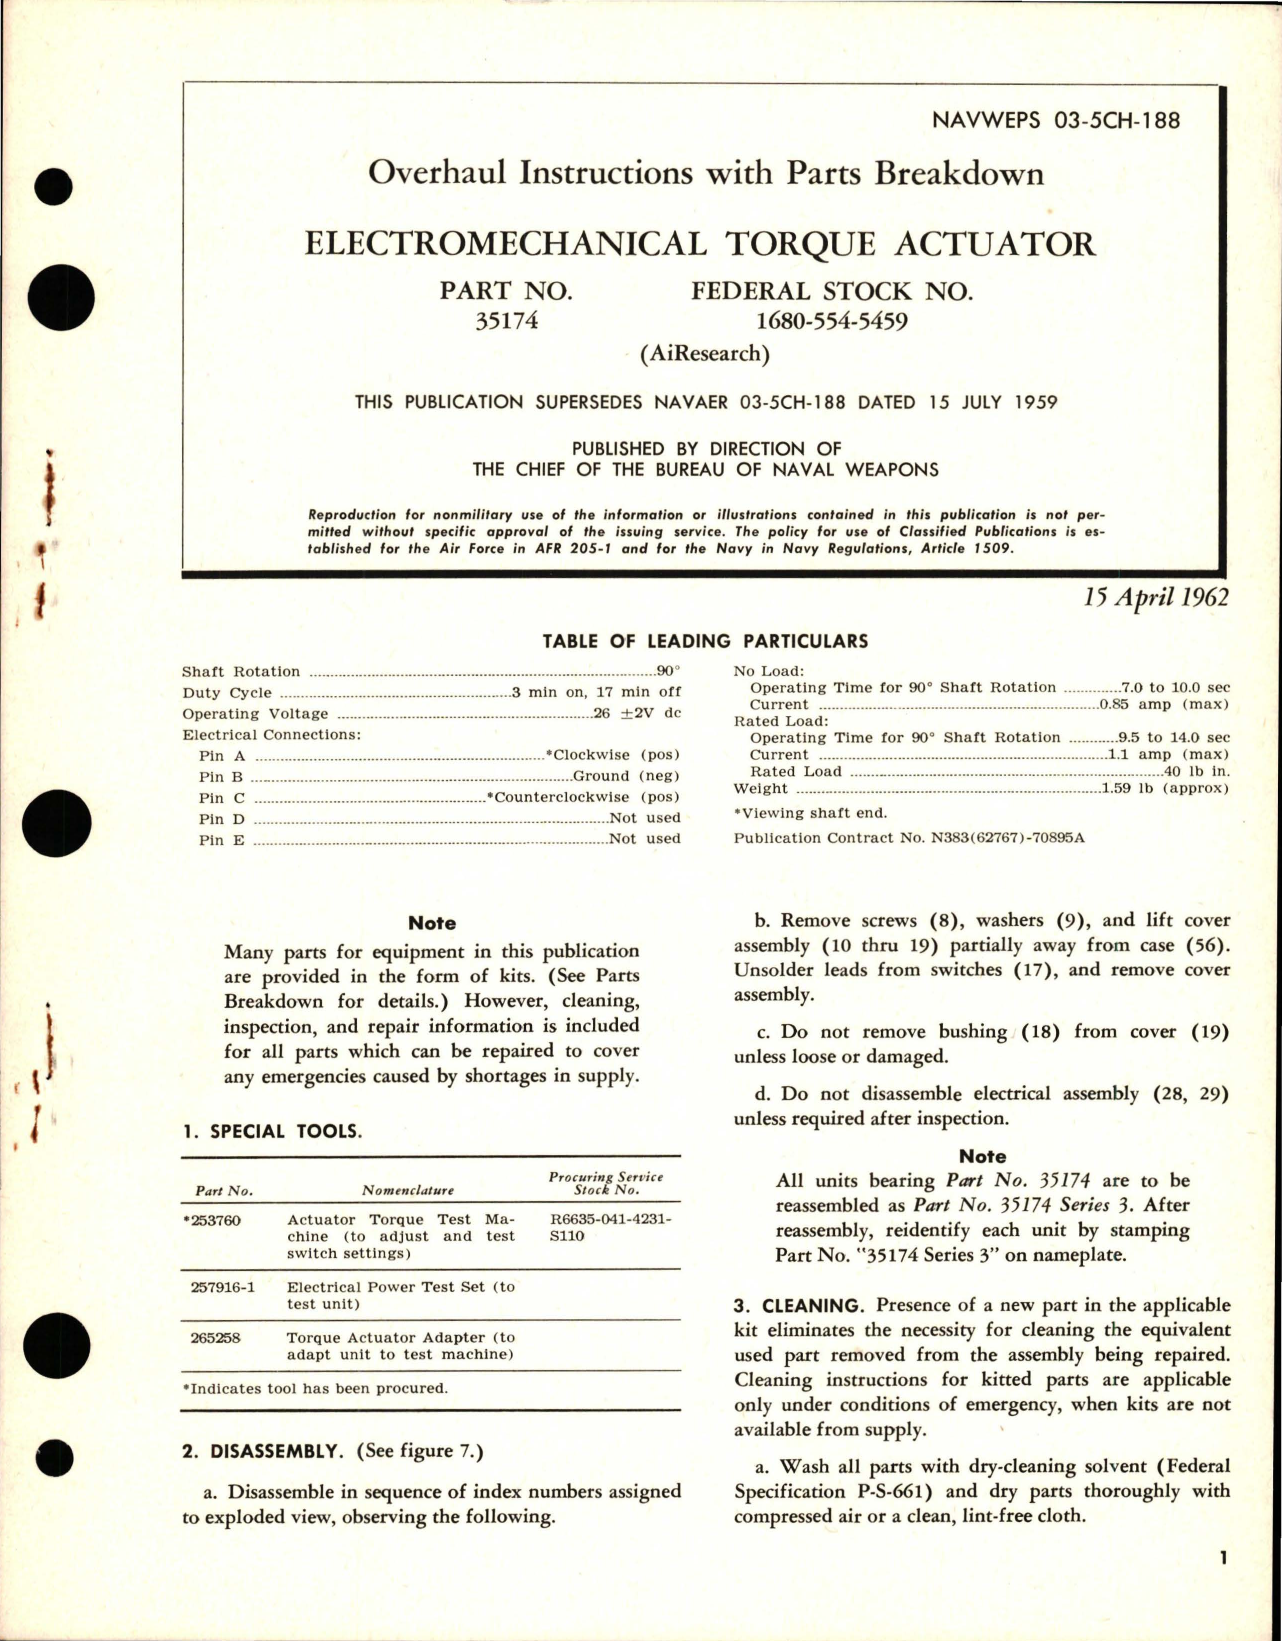 Sample page 1 from AirCorps Library document: Overhaul Instructions with Parts Breakdown for Electromechanical Torque Actuator - Part 35174